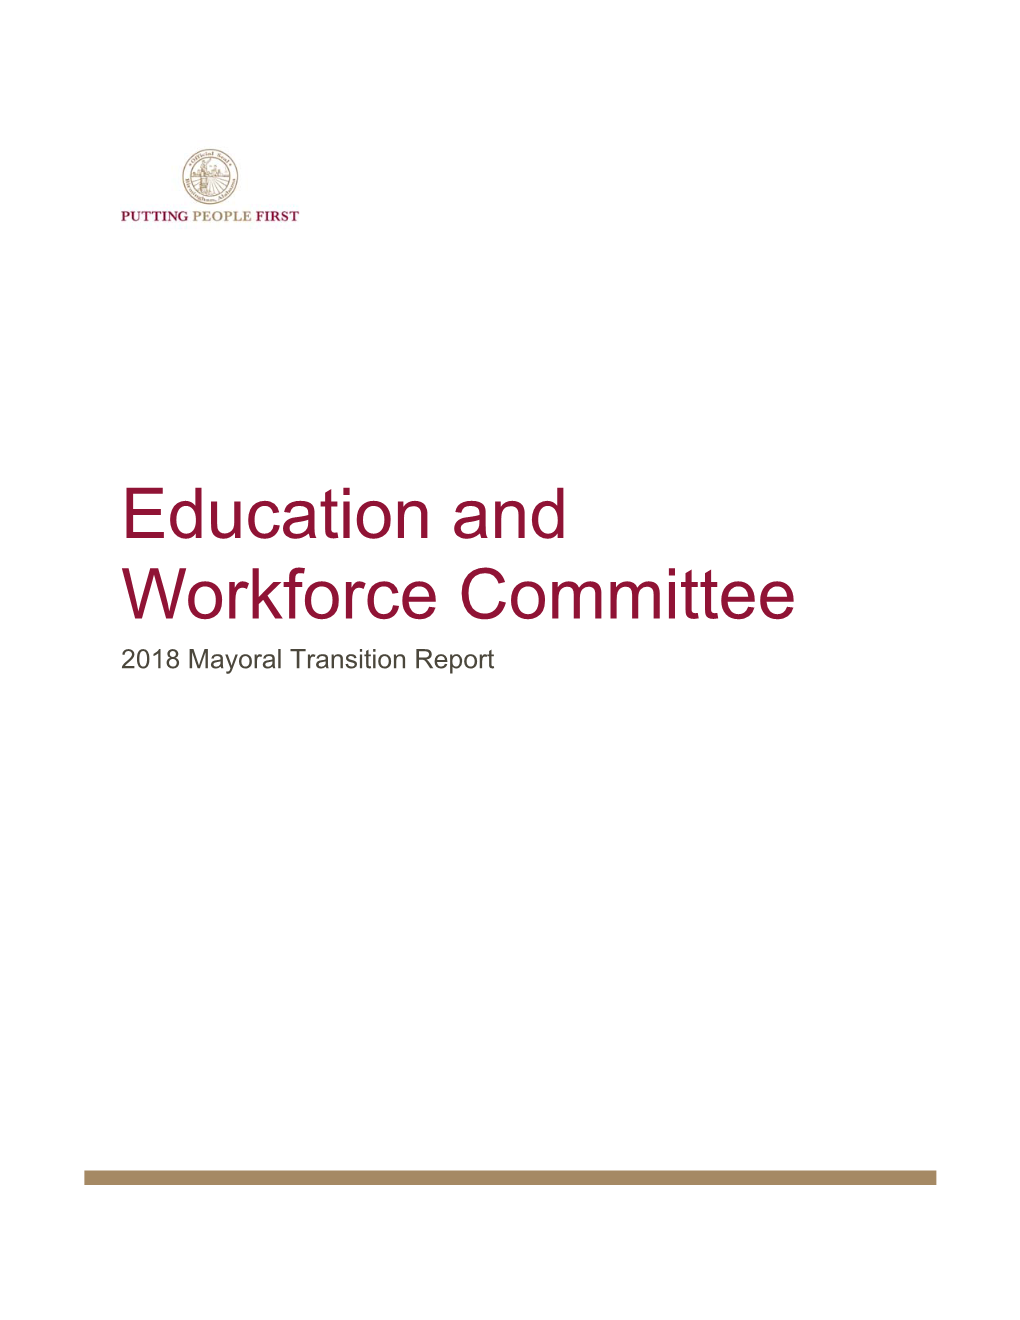 Education and Workforce Committee 2018 Mayoral Transition Report